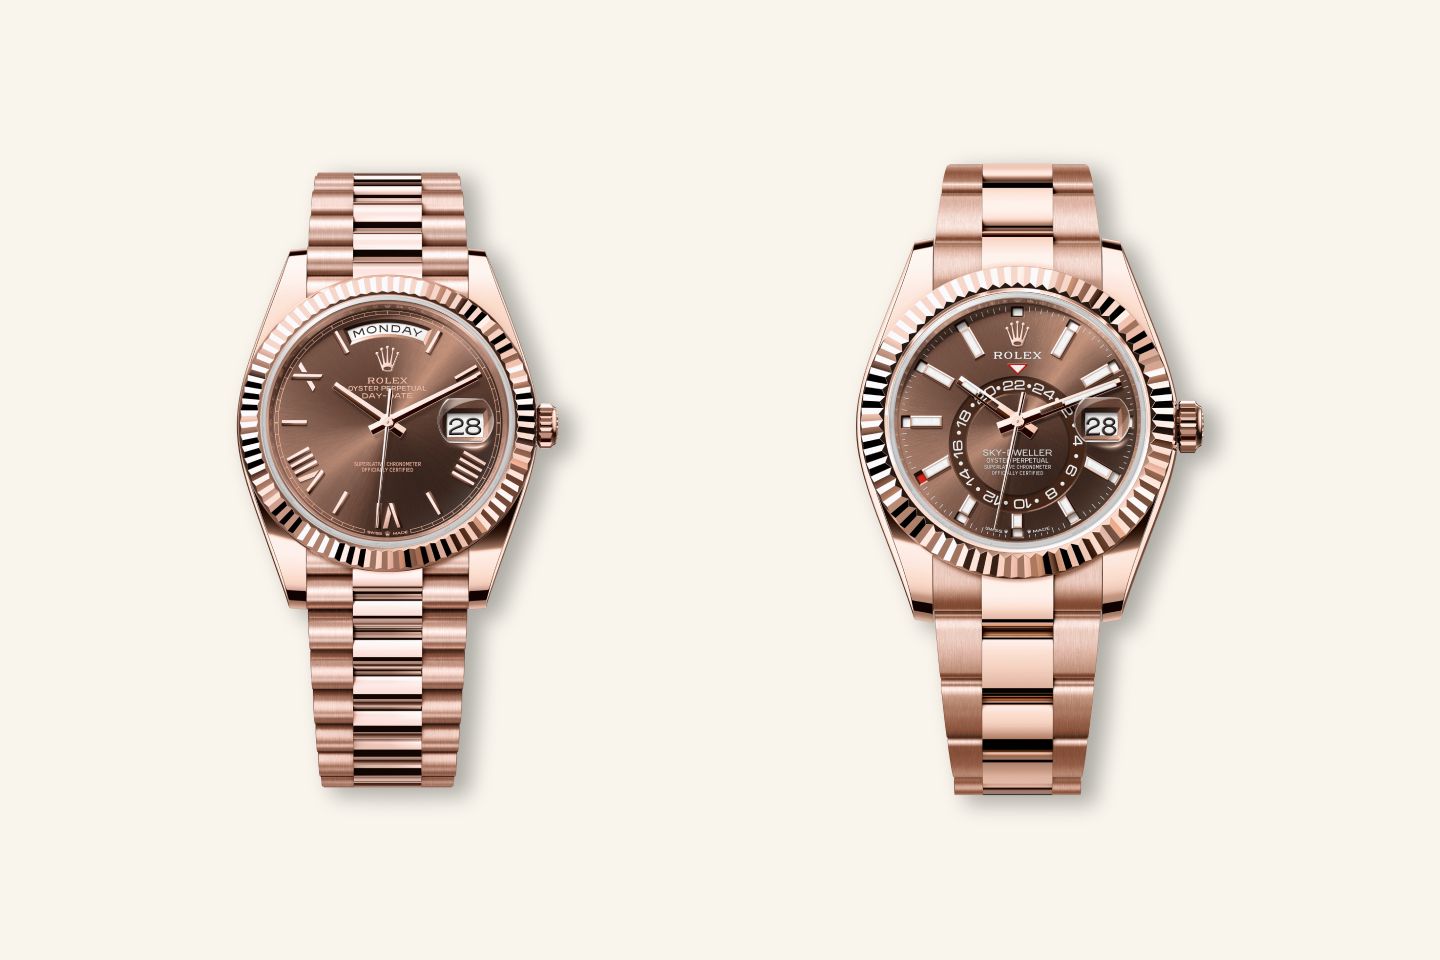 Rolex Day-Date 40 and the Sky-Dweller in Everose gold with chocolate dials